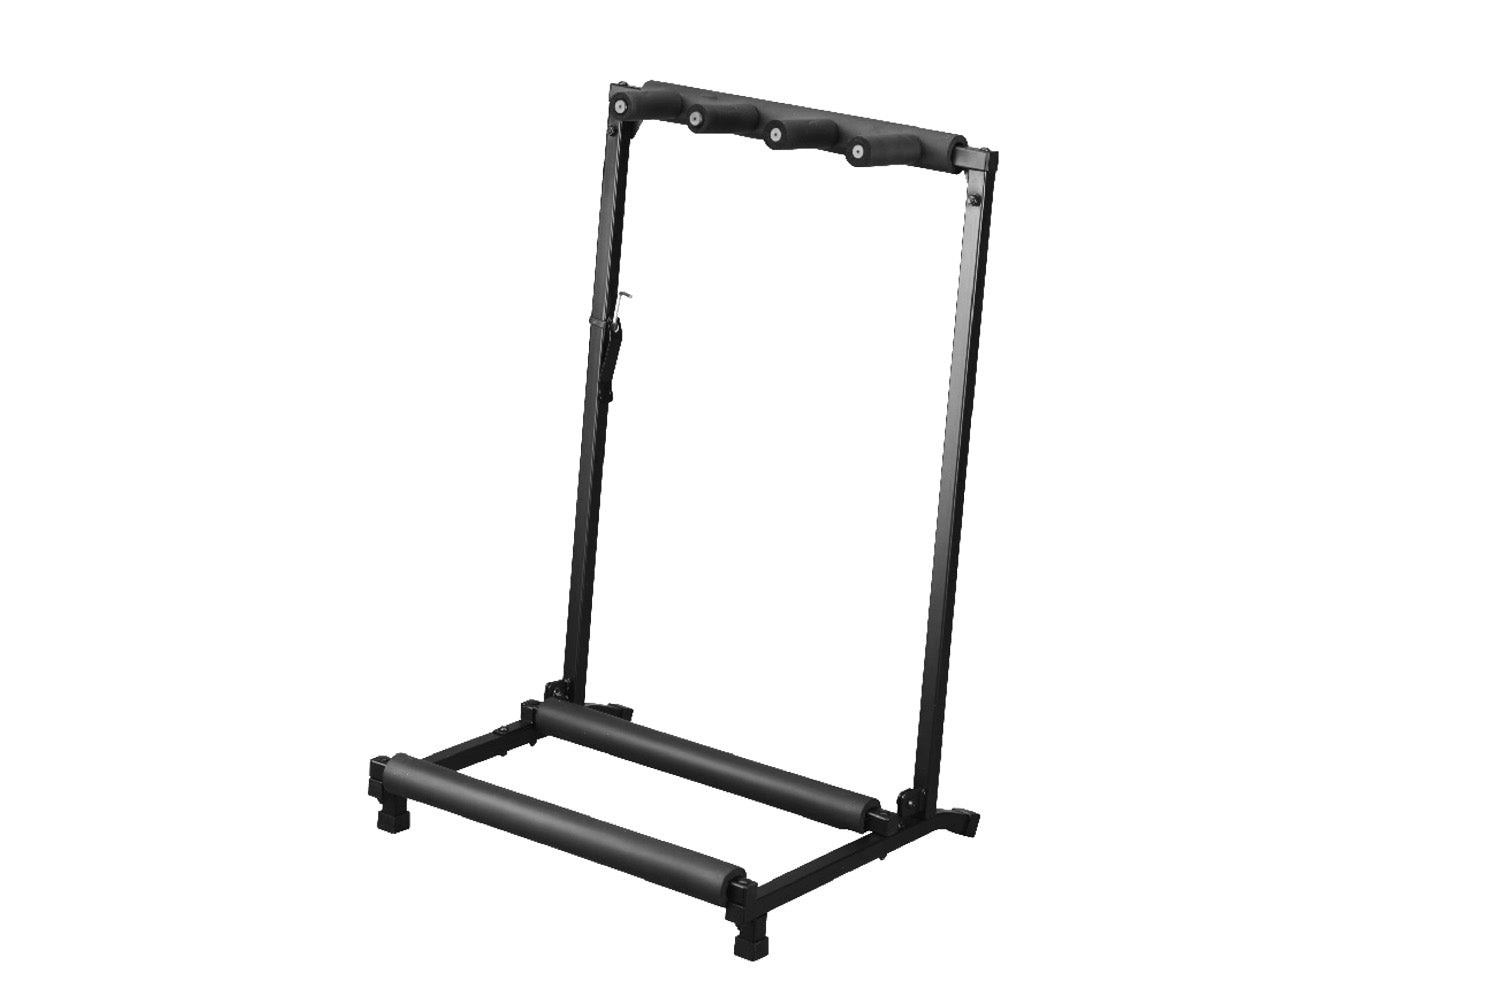 DG036-3LP - Guitar rack stand to hold up to 3 guitars